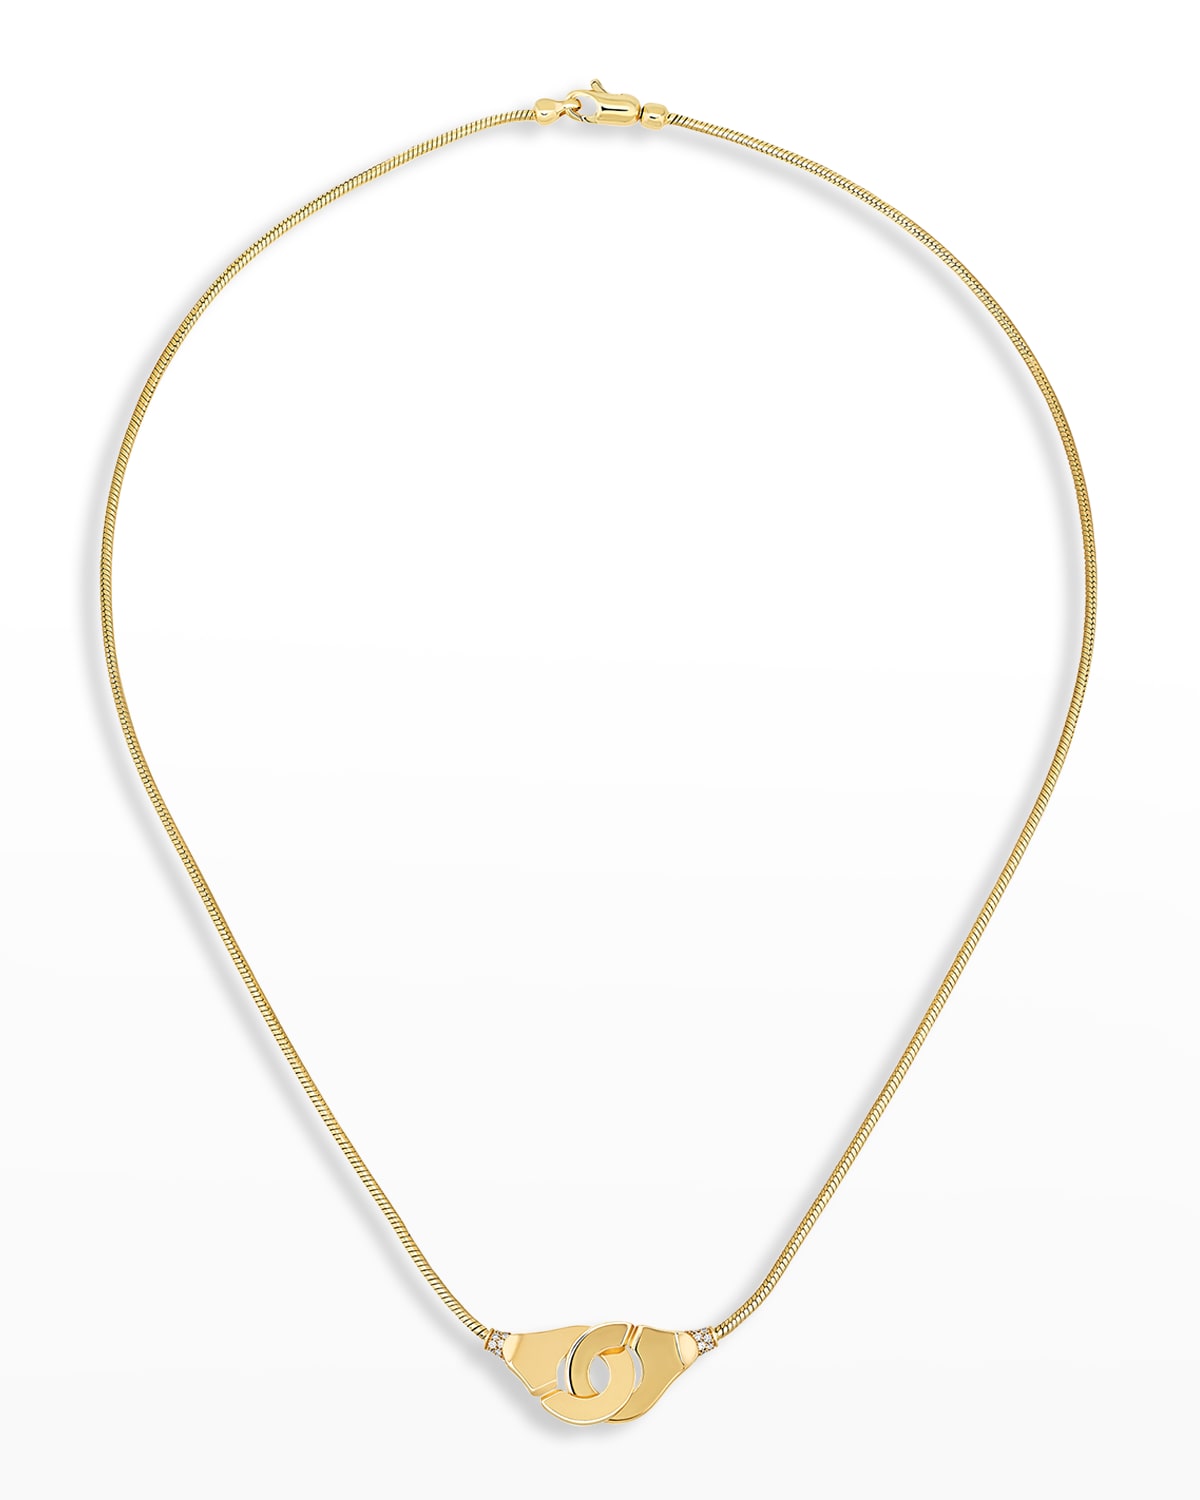 DINH VAN Yellow Gold Menottes R15 Extra-Large Snake Chain Necklace with Diamond Shoulders